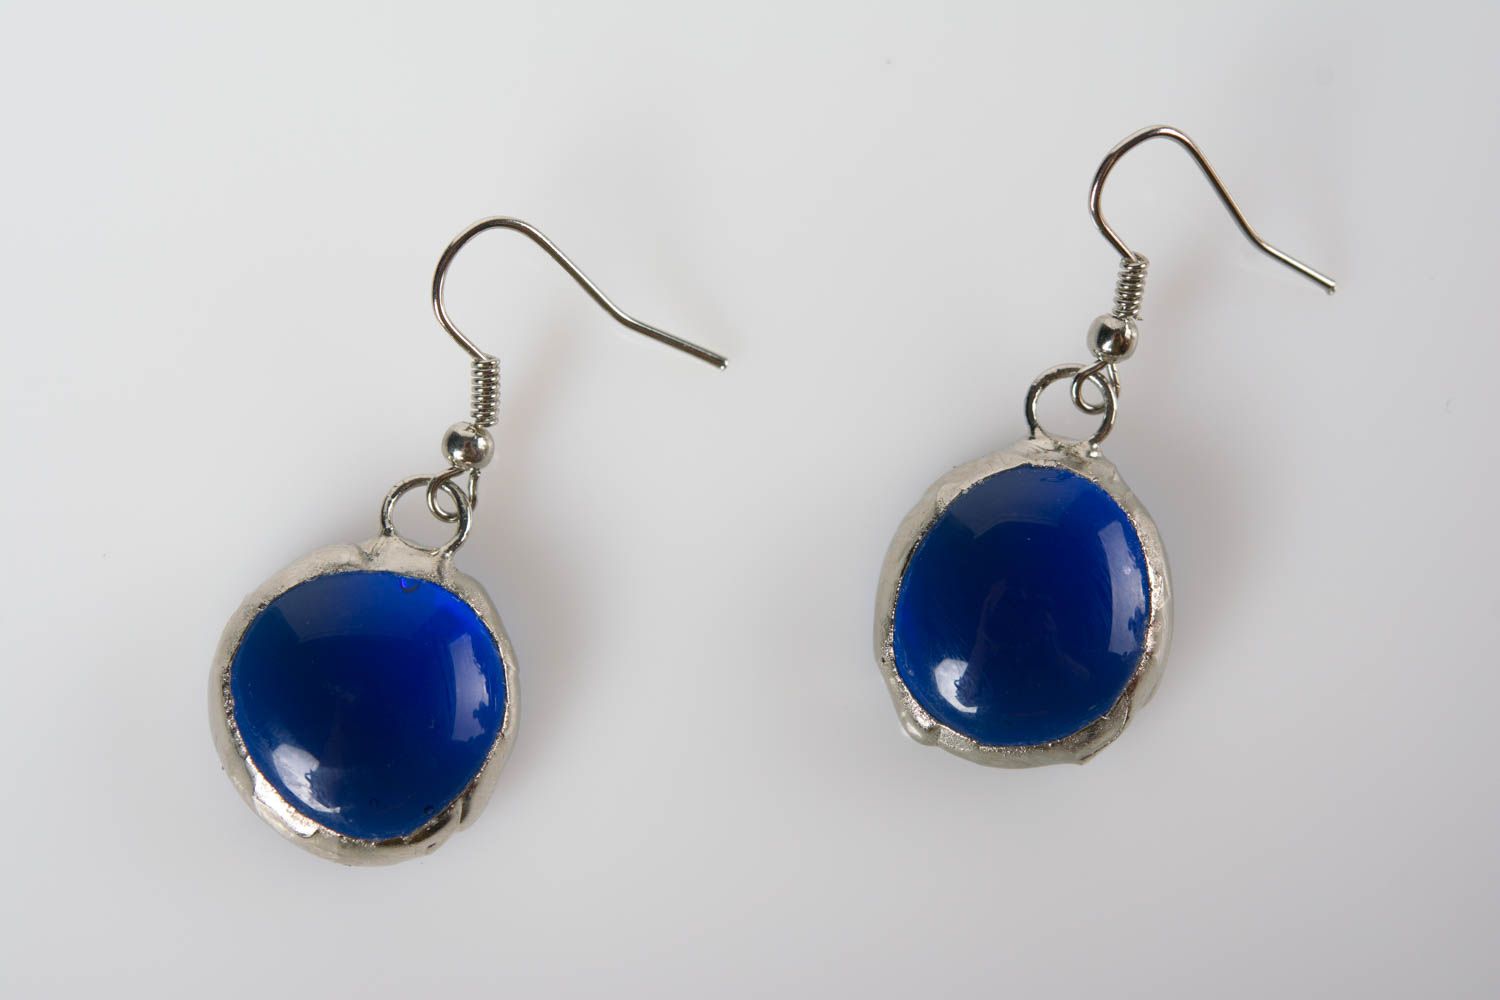 Handmade designer unusual round blue earrings made of glass and metal photo 1